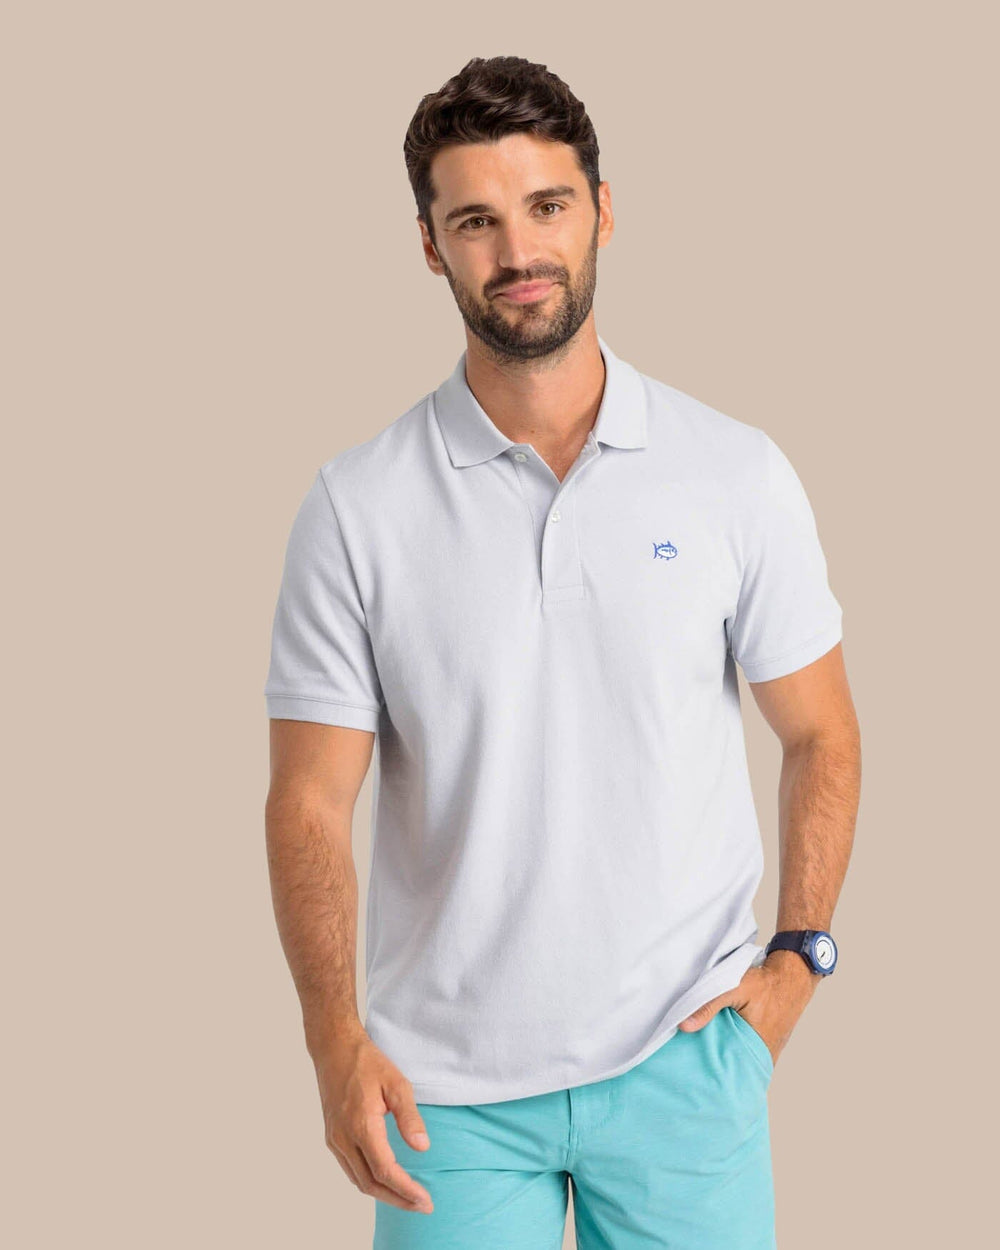 The model front view of the Men's New Skipjack Polo Shirt by Southern Tide - Slate Grey